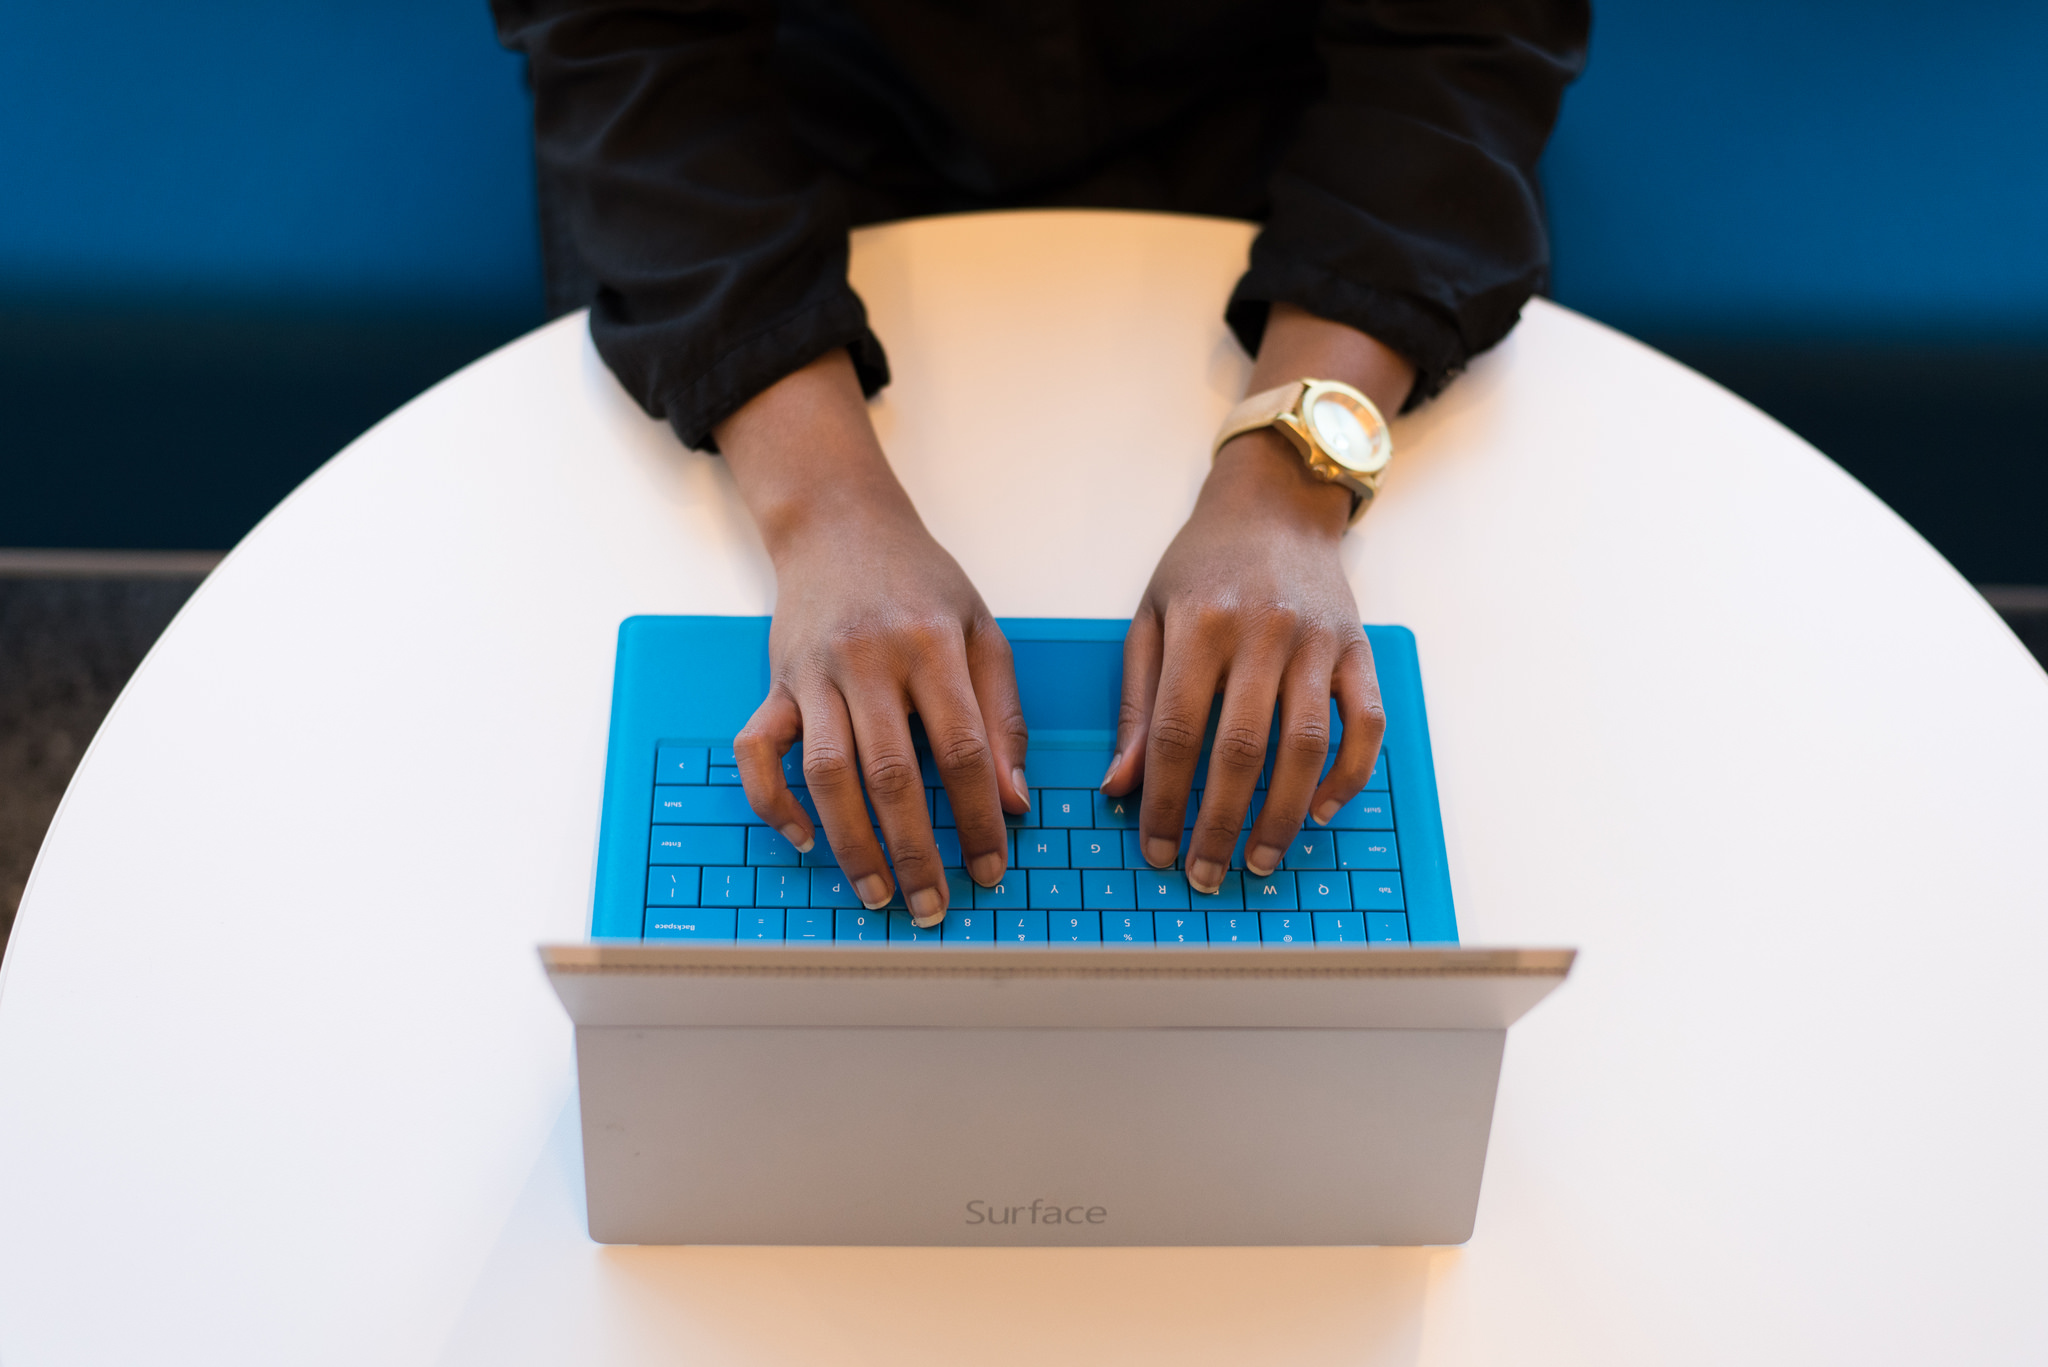 [IMAGE] A pair of dark-skinned hands wearing a gold watch are typing on a blue laptop keyboard